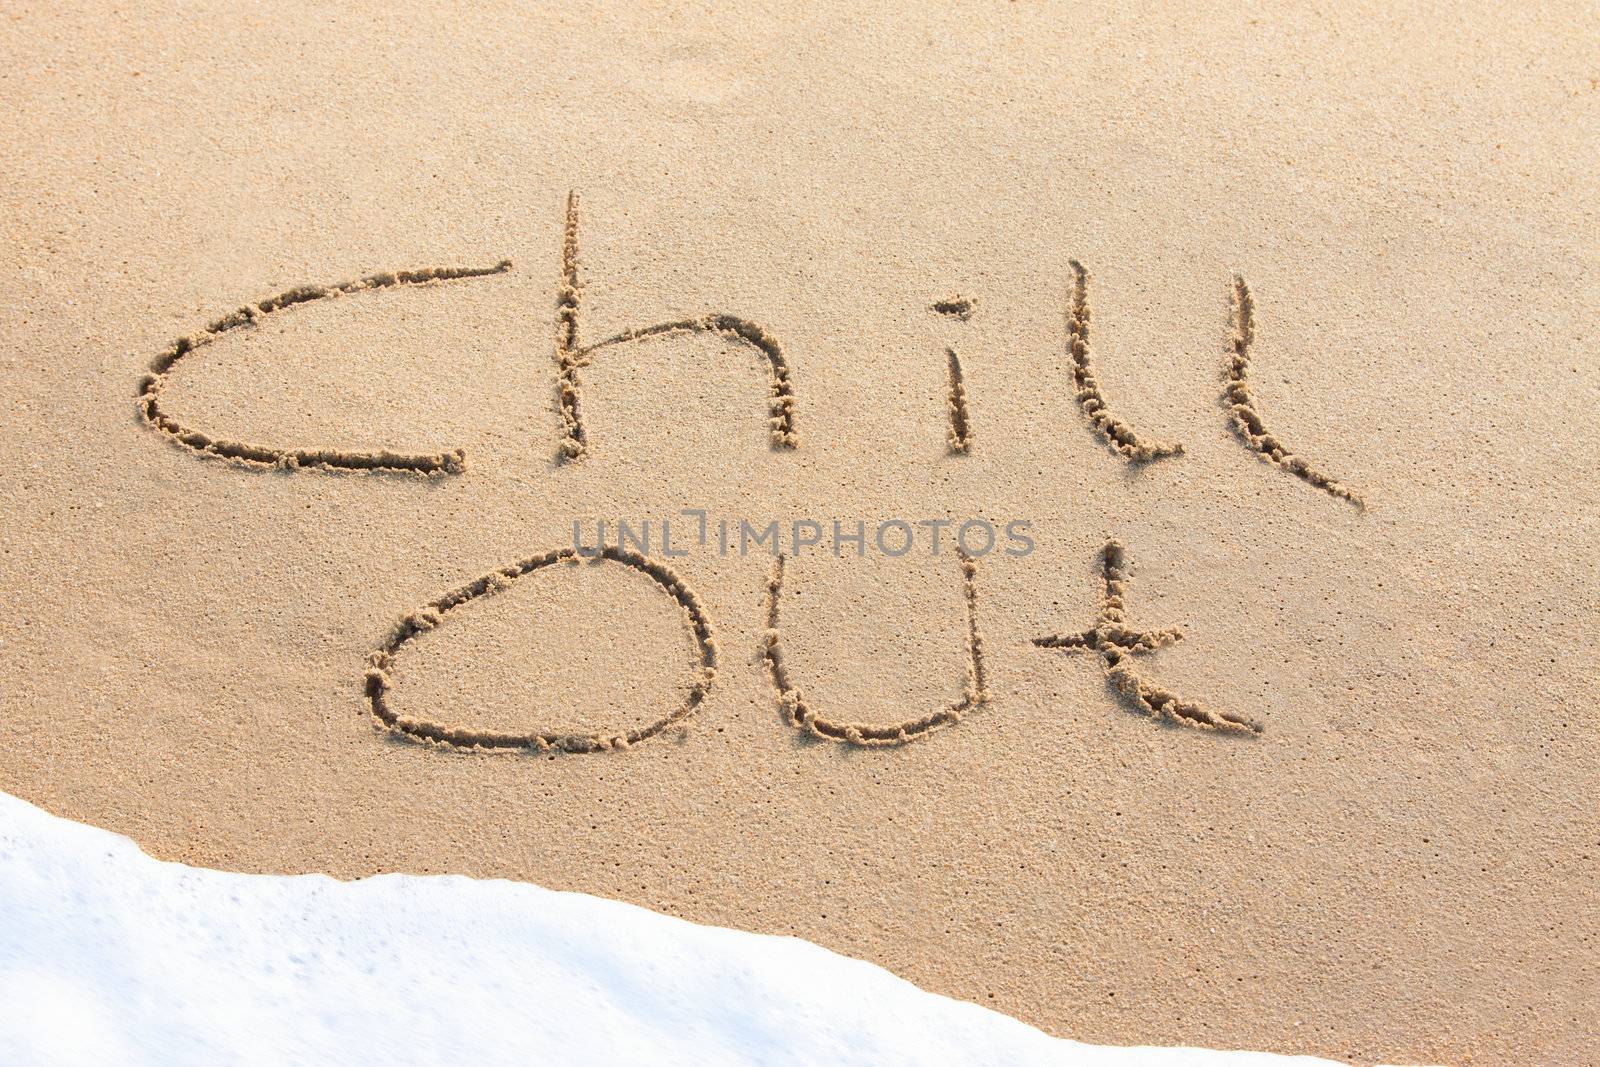 Chill out - written in the sand with a foamy wave underneath